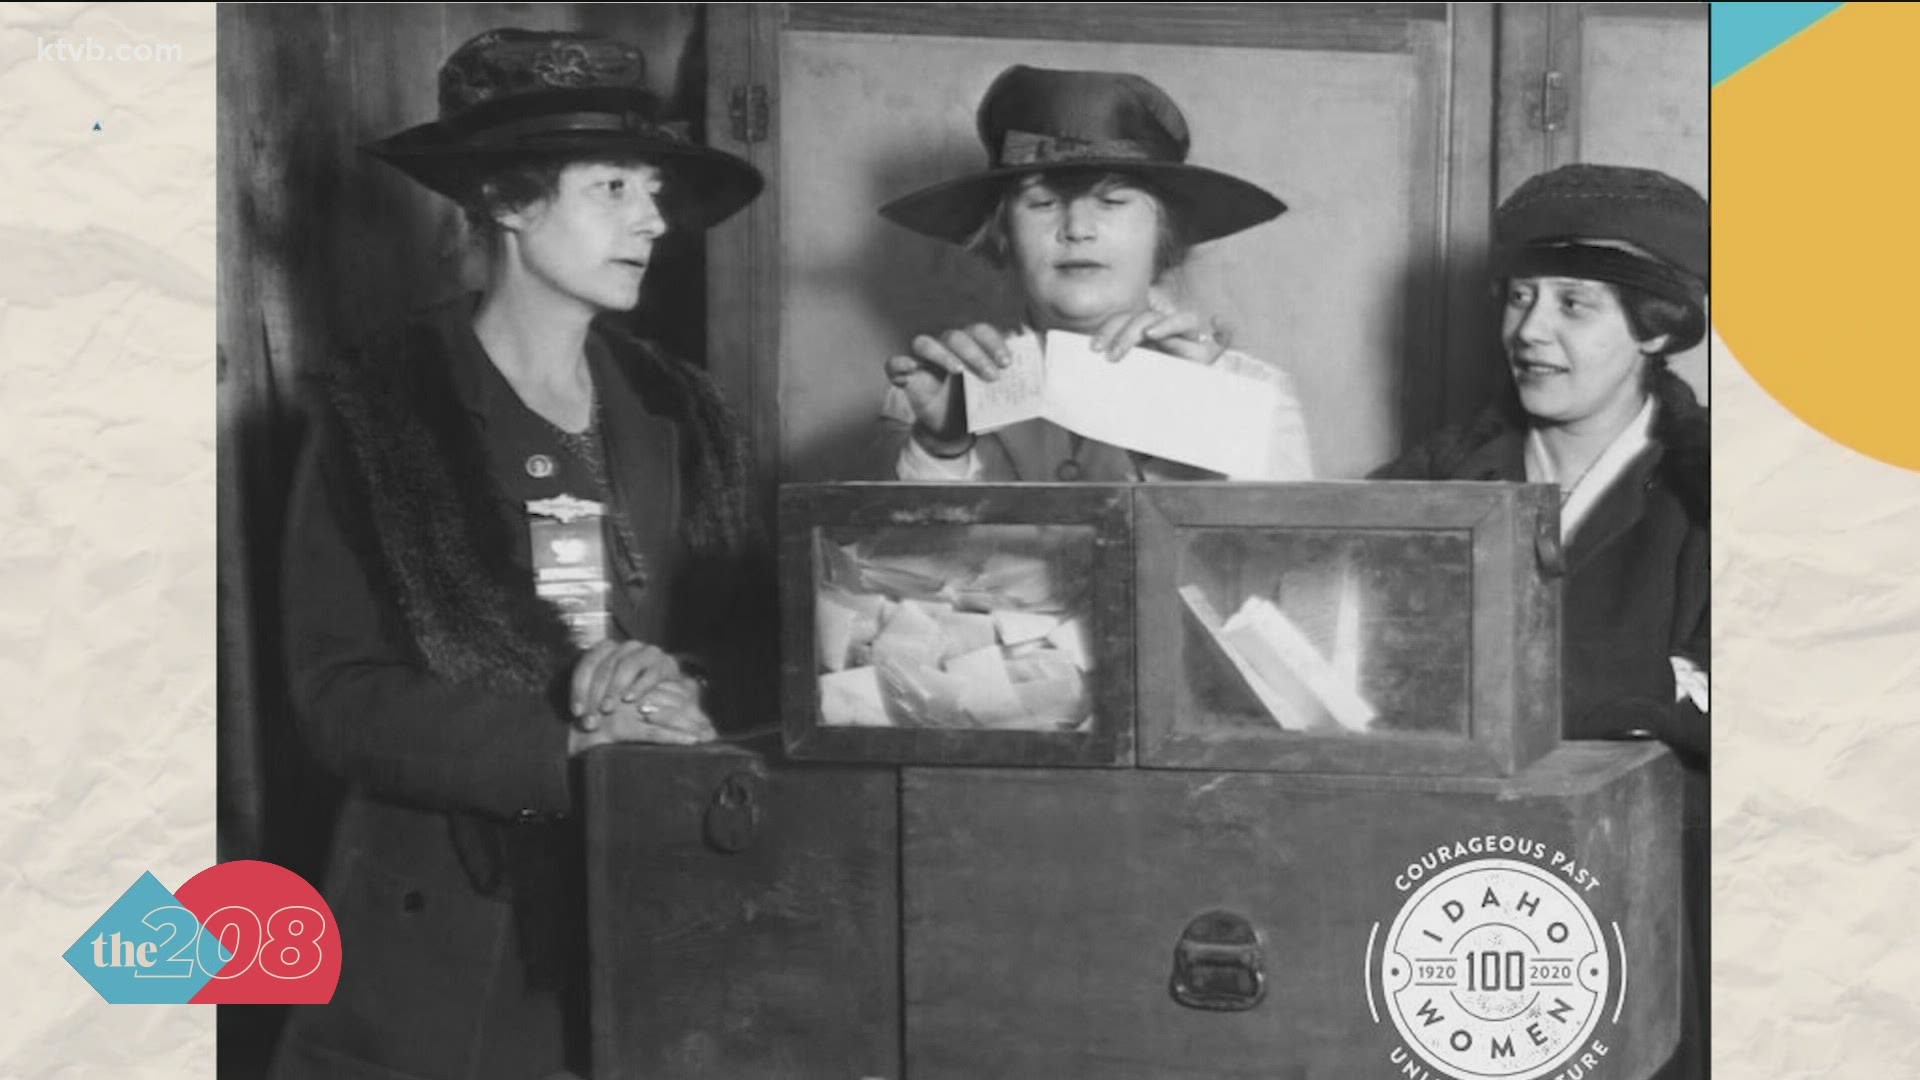 100 years ago, women across the nation earned the right to vote. However, one Idaho Senator delayed the victory greatly.